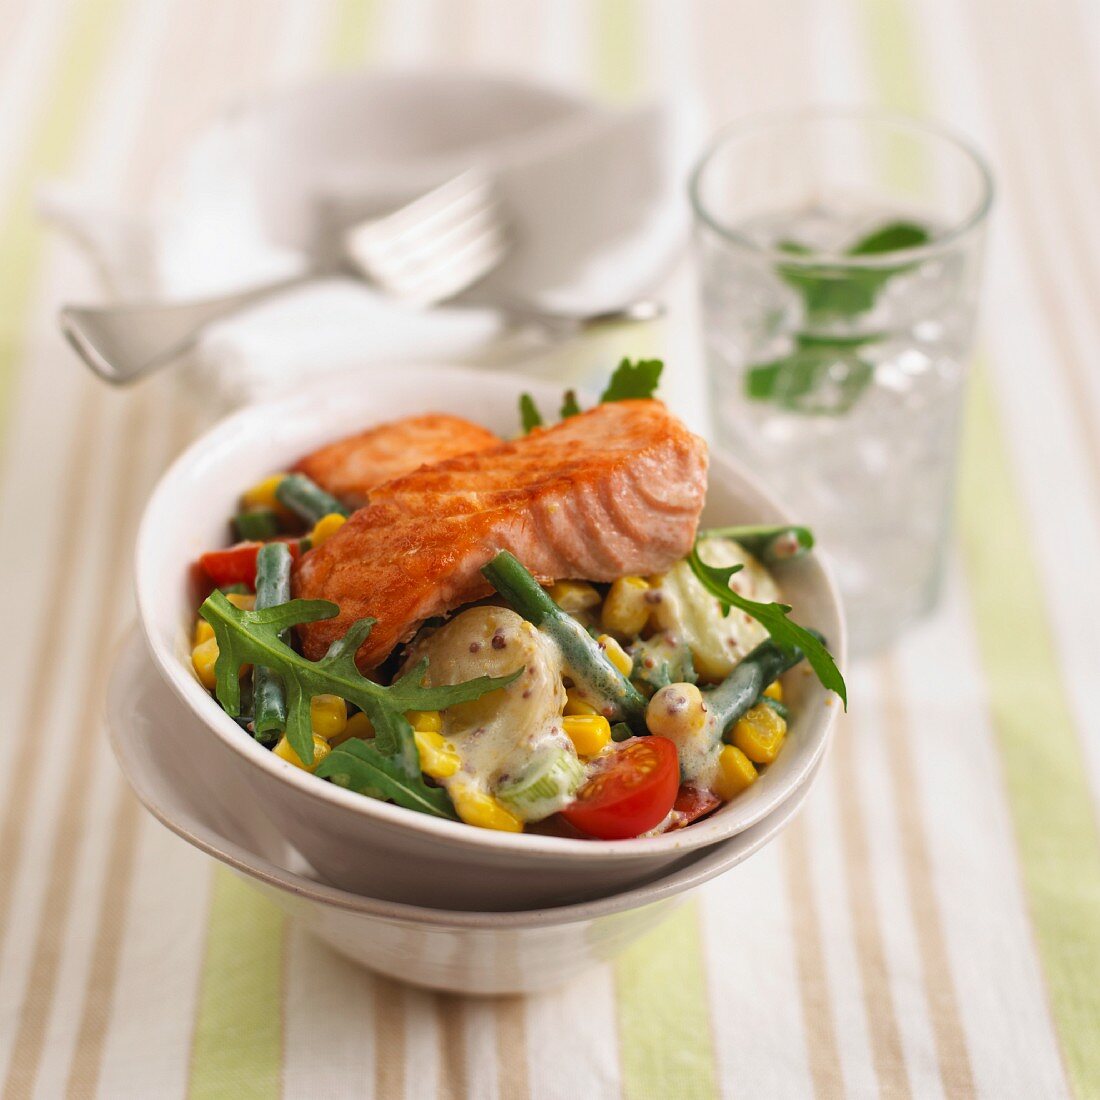 Salmon fillet on a bed of potato salad with vegetables and a mustard dressing